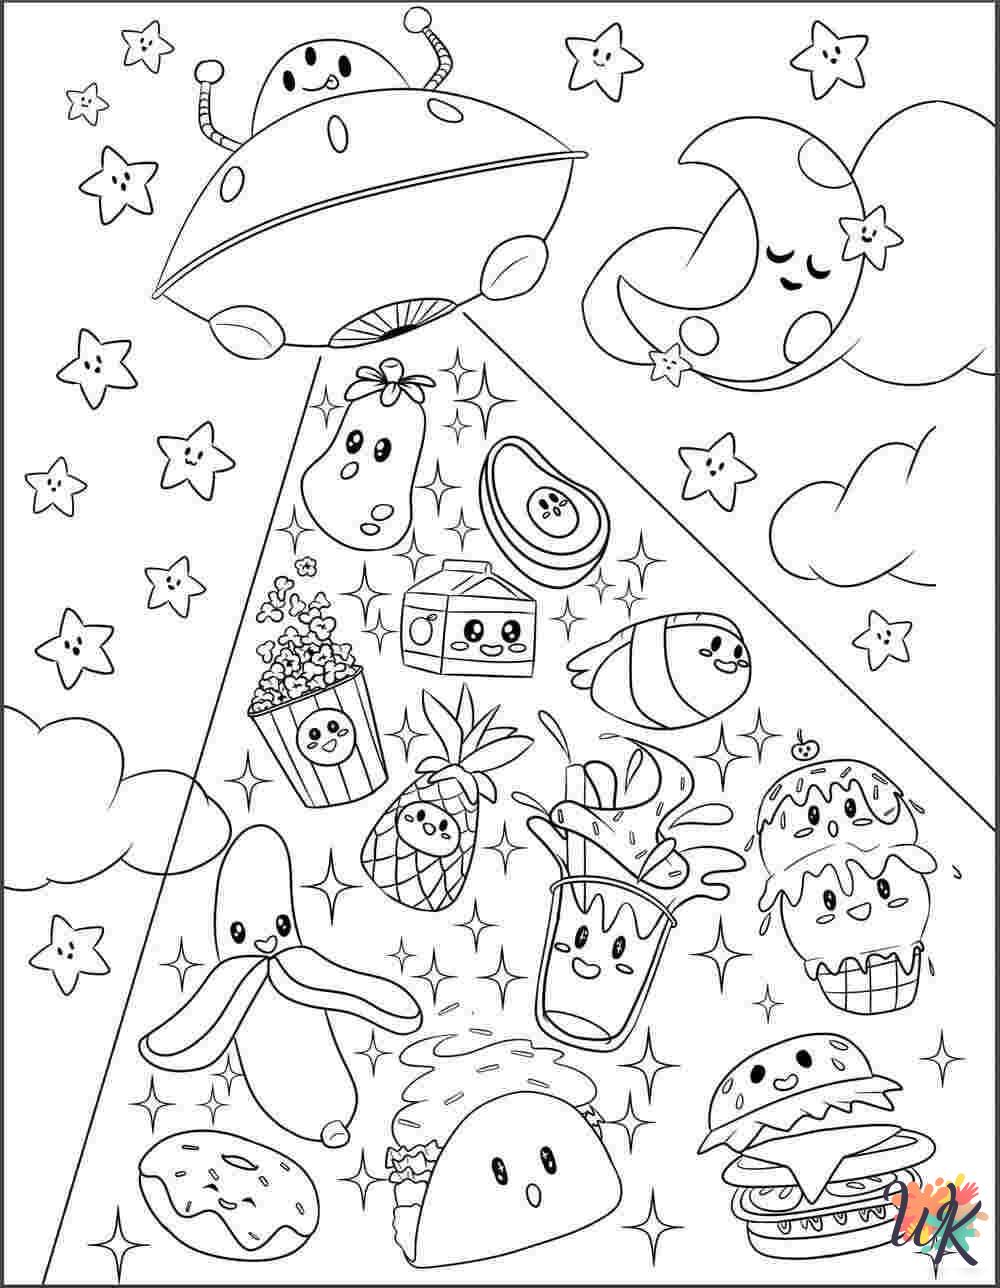 Squishmallows themed coloring pages